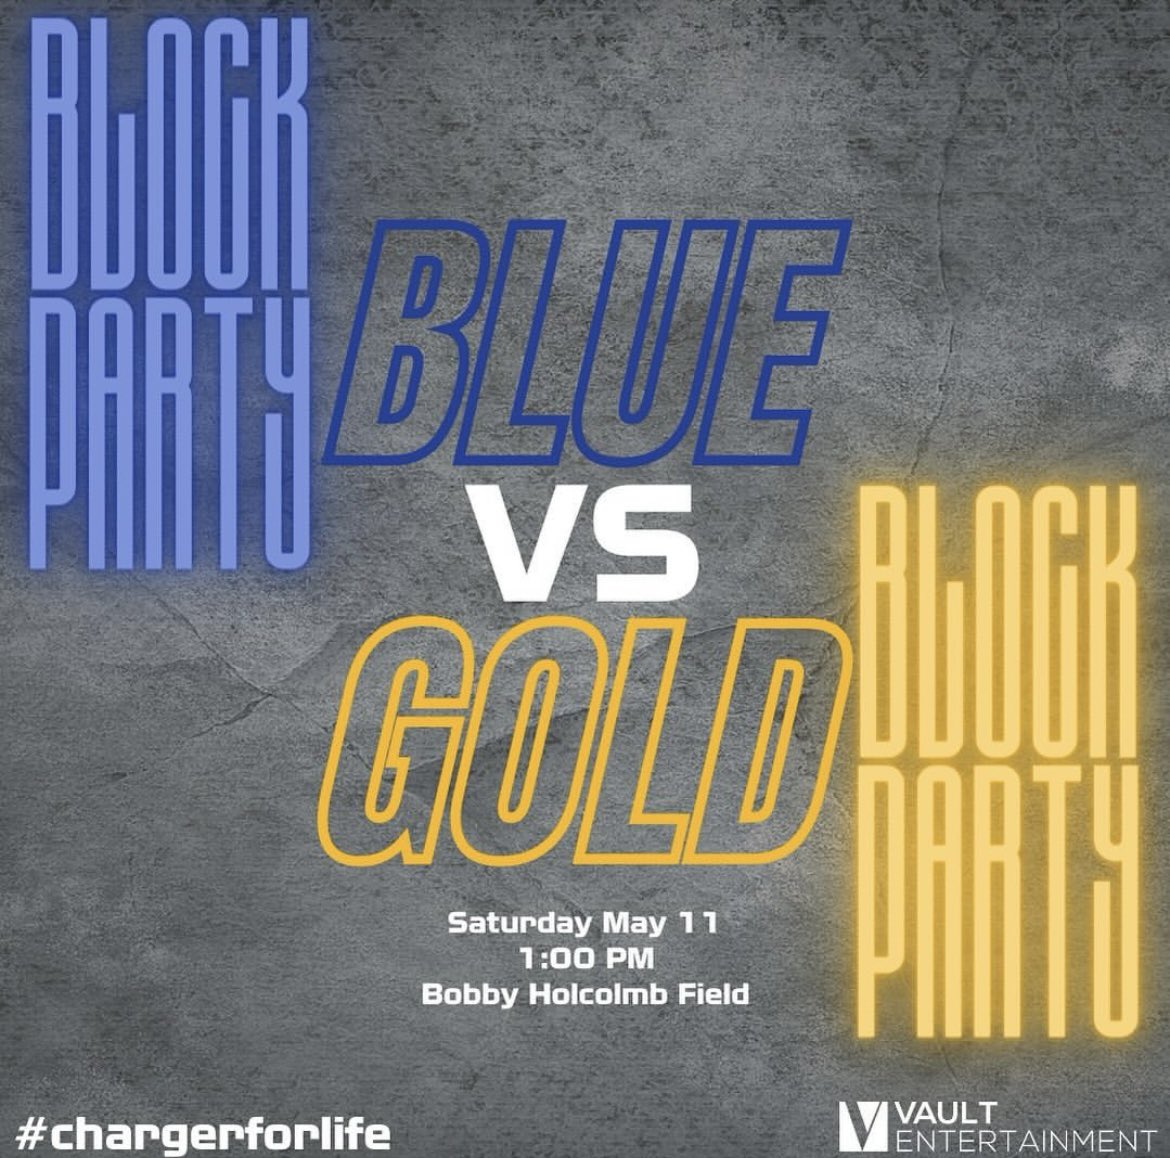 #BlockParty24 x #chargerforlife